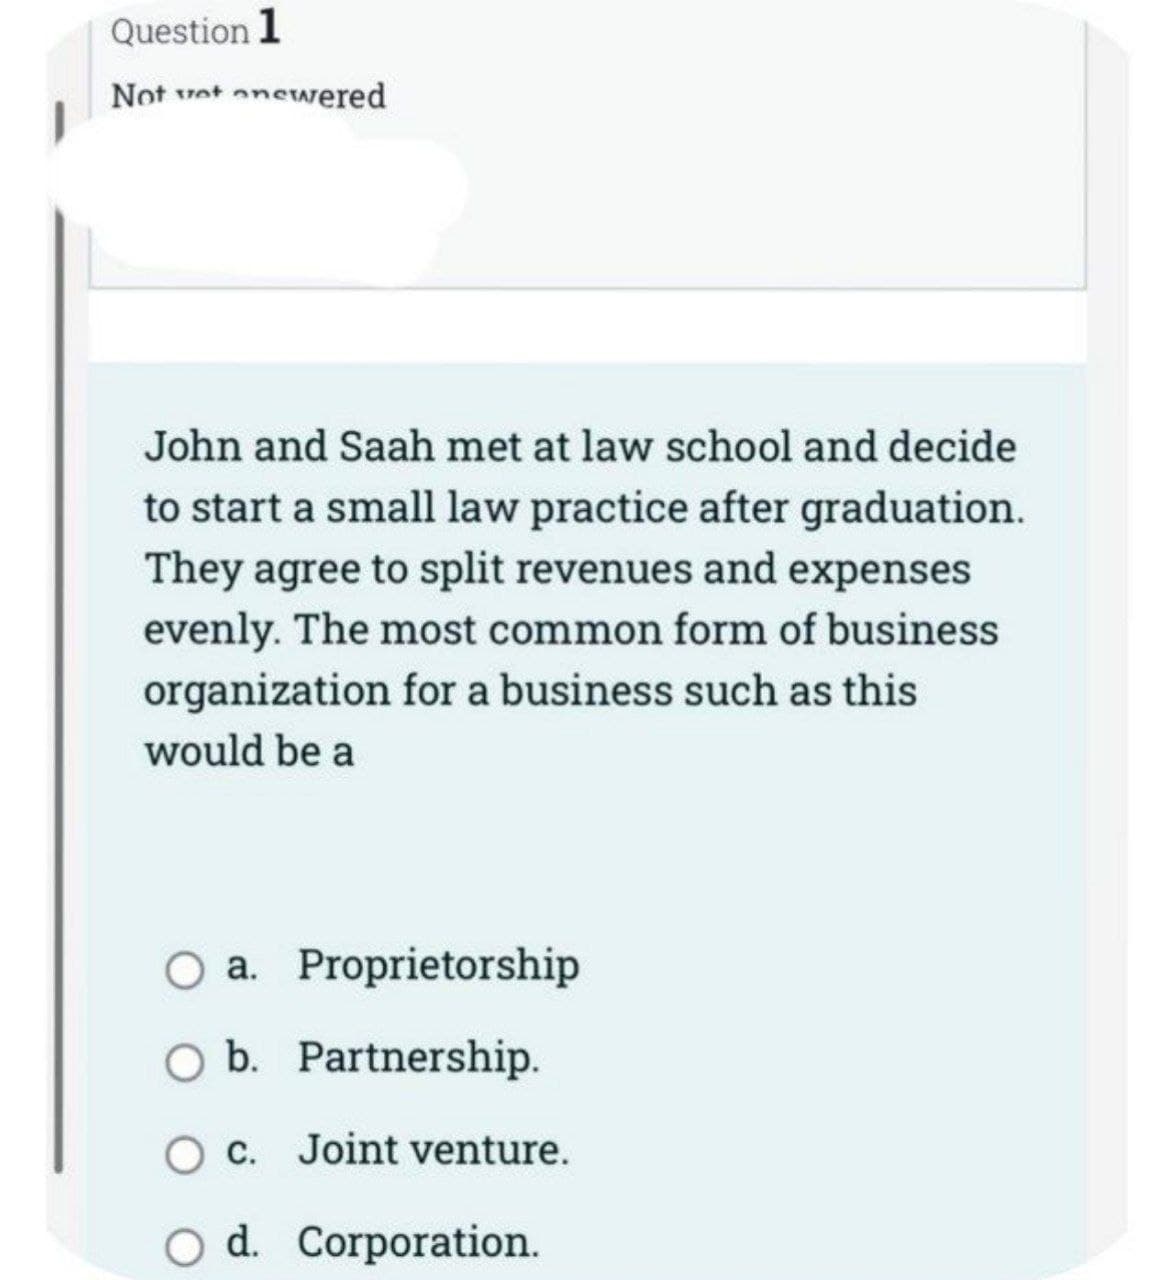 Question 1
Not wet onewered
John and Saah met at law school and decide
to start a small law practice after graduation.
They agree to split revenues and expenses
evenly. The most common form of business
organization for a business such as this
would be a
O a.
Proprietorship
O b. Partnership.
O c. Joint venture.
O d. Corporation.